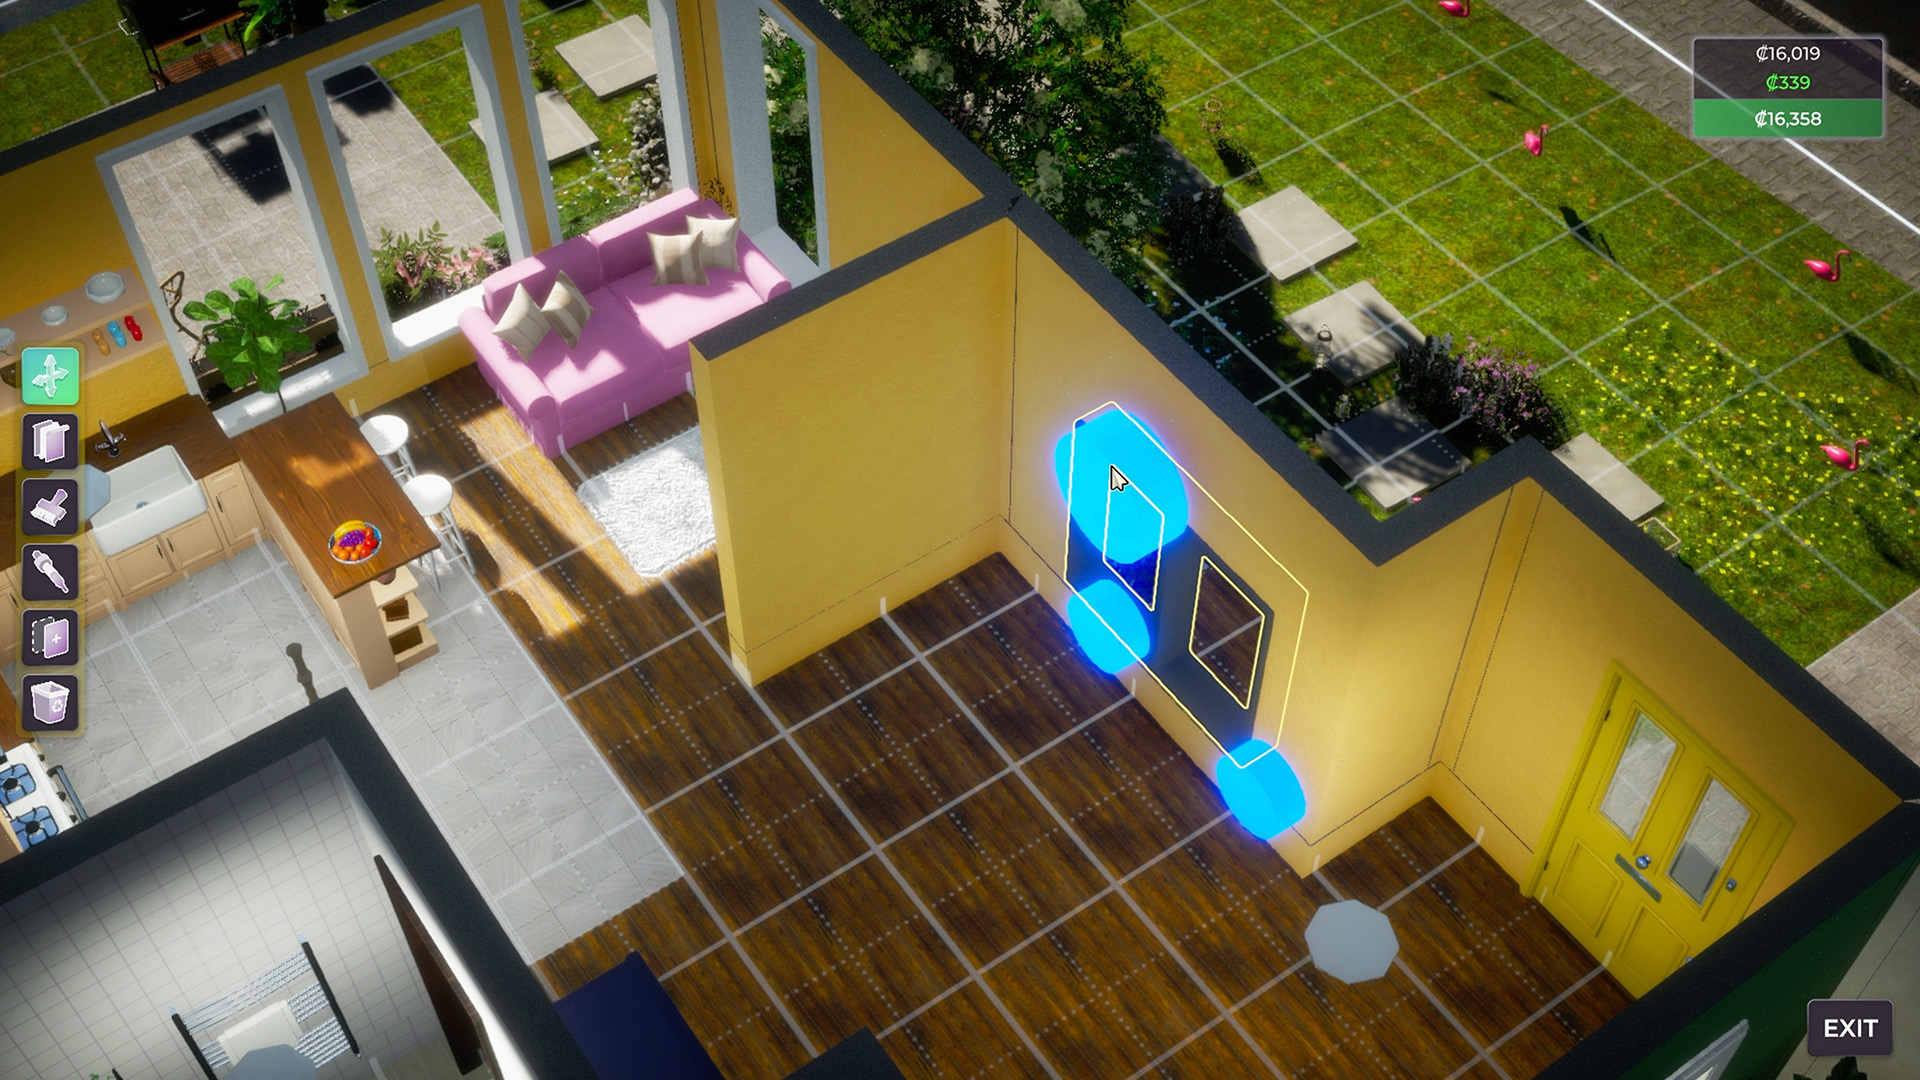 Paradox Tectonic is announcing Life by You: A New Life Sim